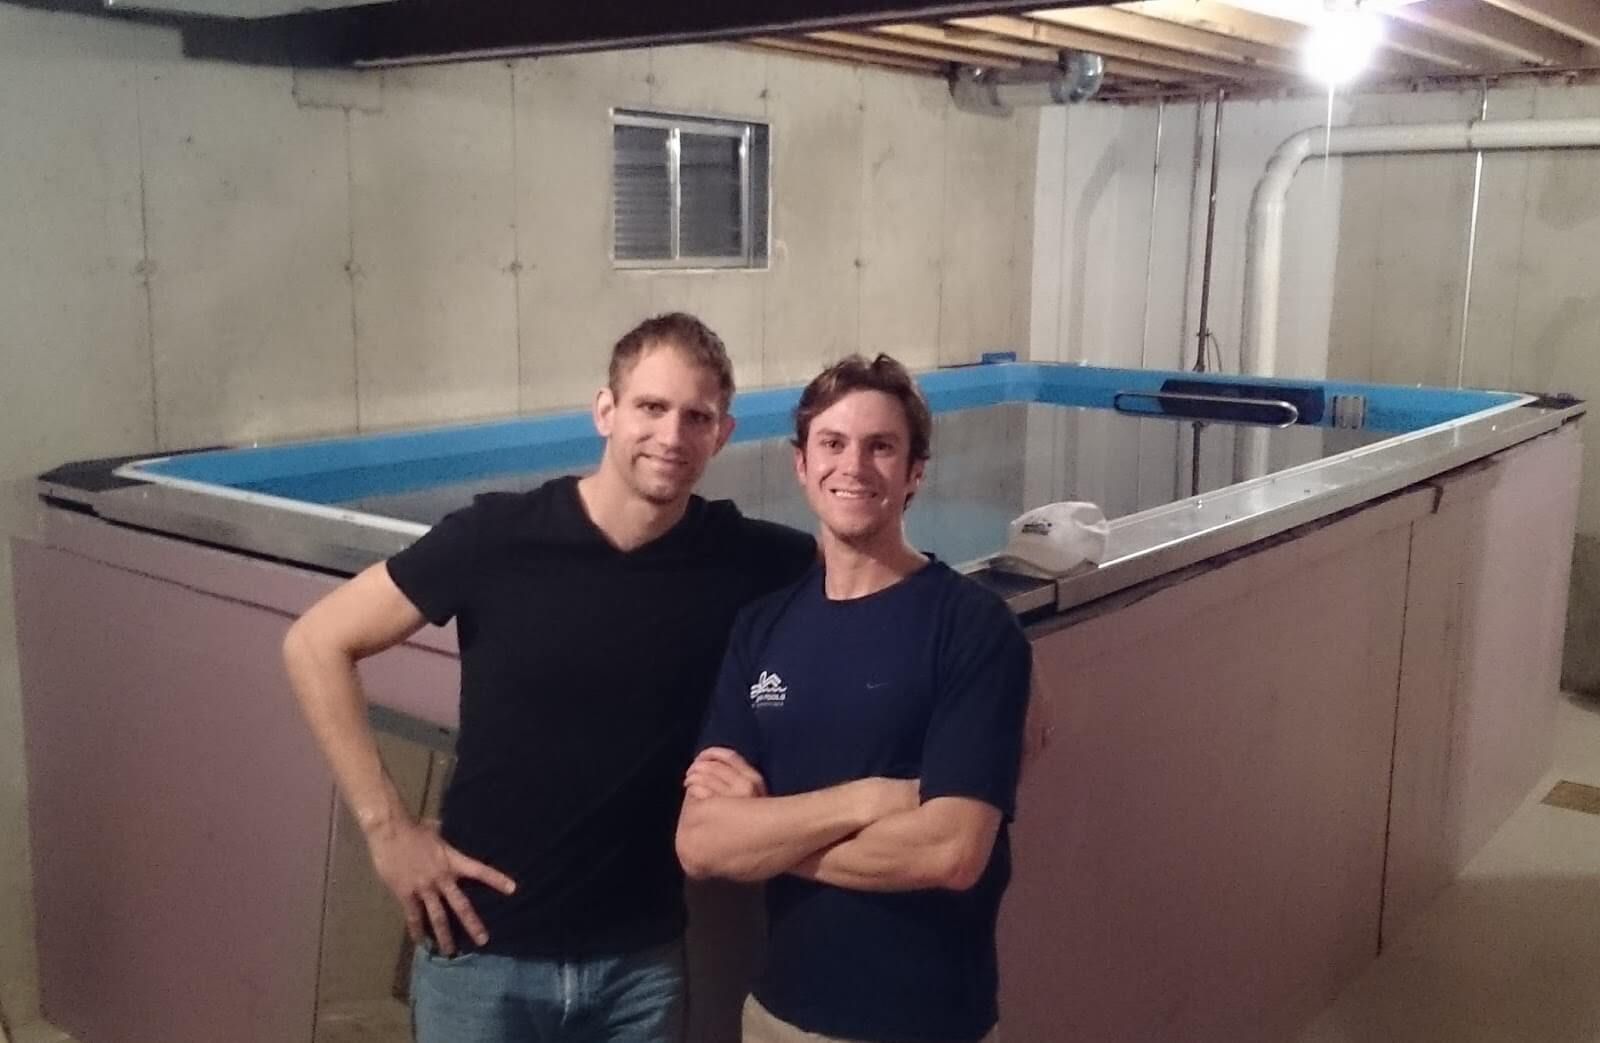 Professional triathlete and Endless Pools' own Adam Alper after installing this Endless Pools swimming machine